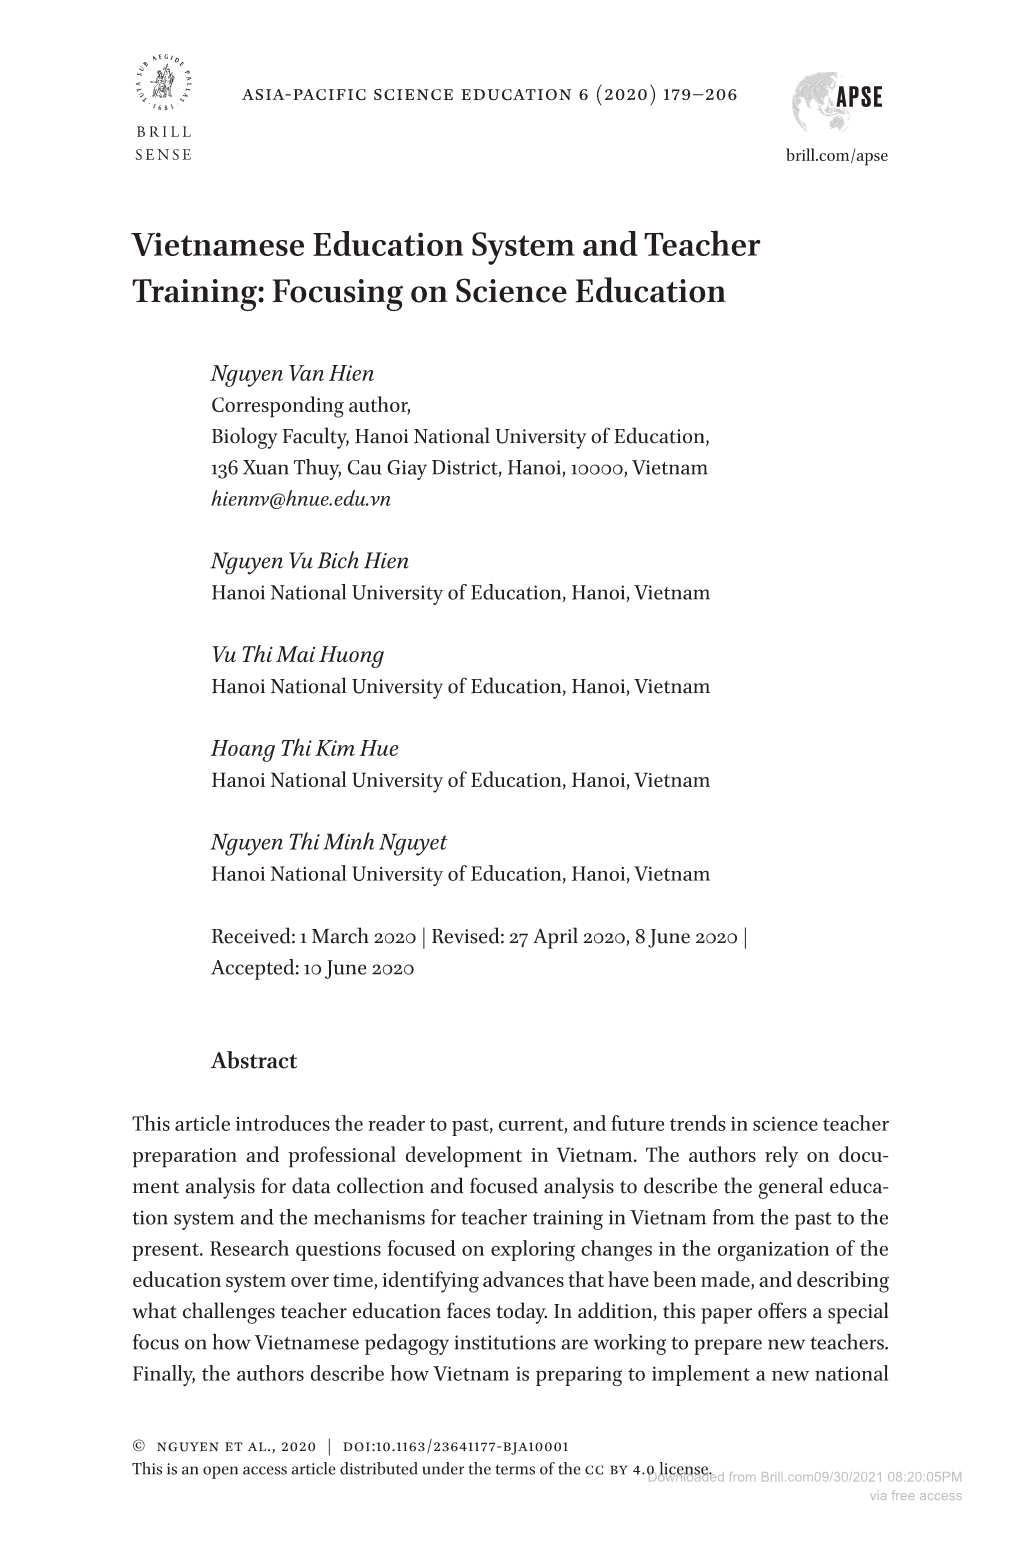 Vietnamese Education System and Teacher Training: Focusing on Science Education